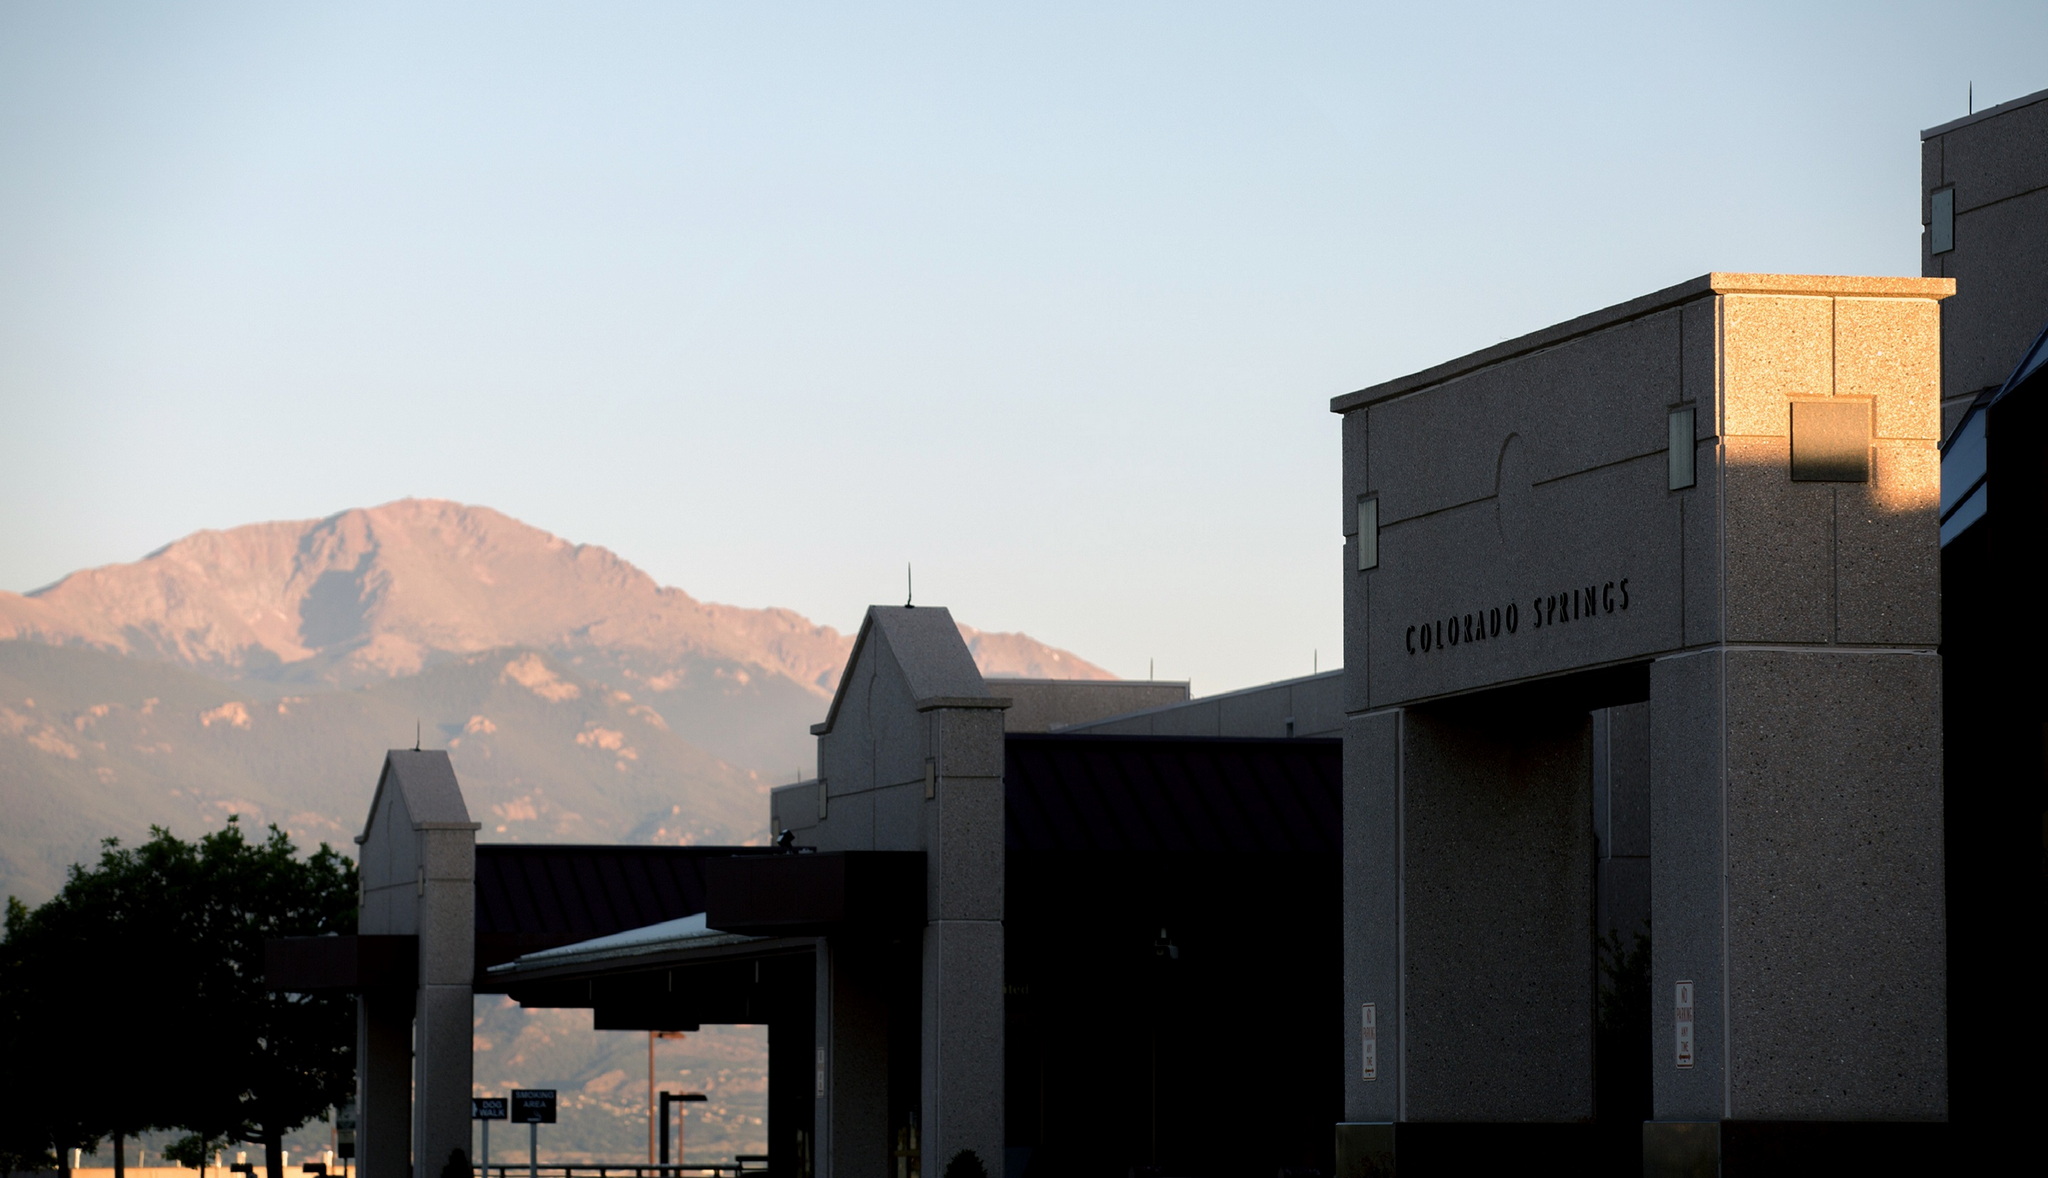 front entrance to Colorado Springs Airport with Mountains in background.